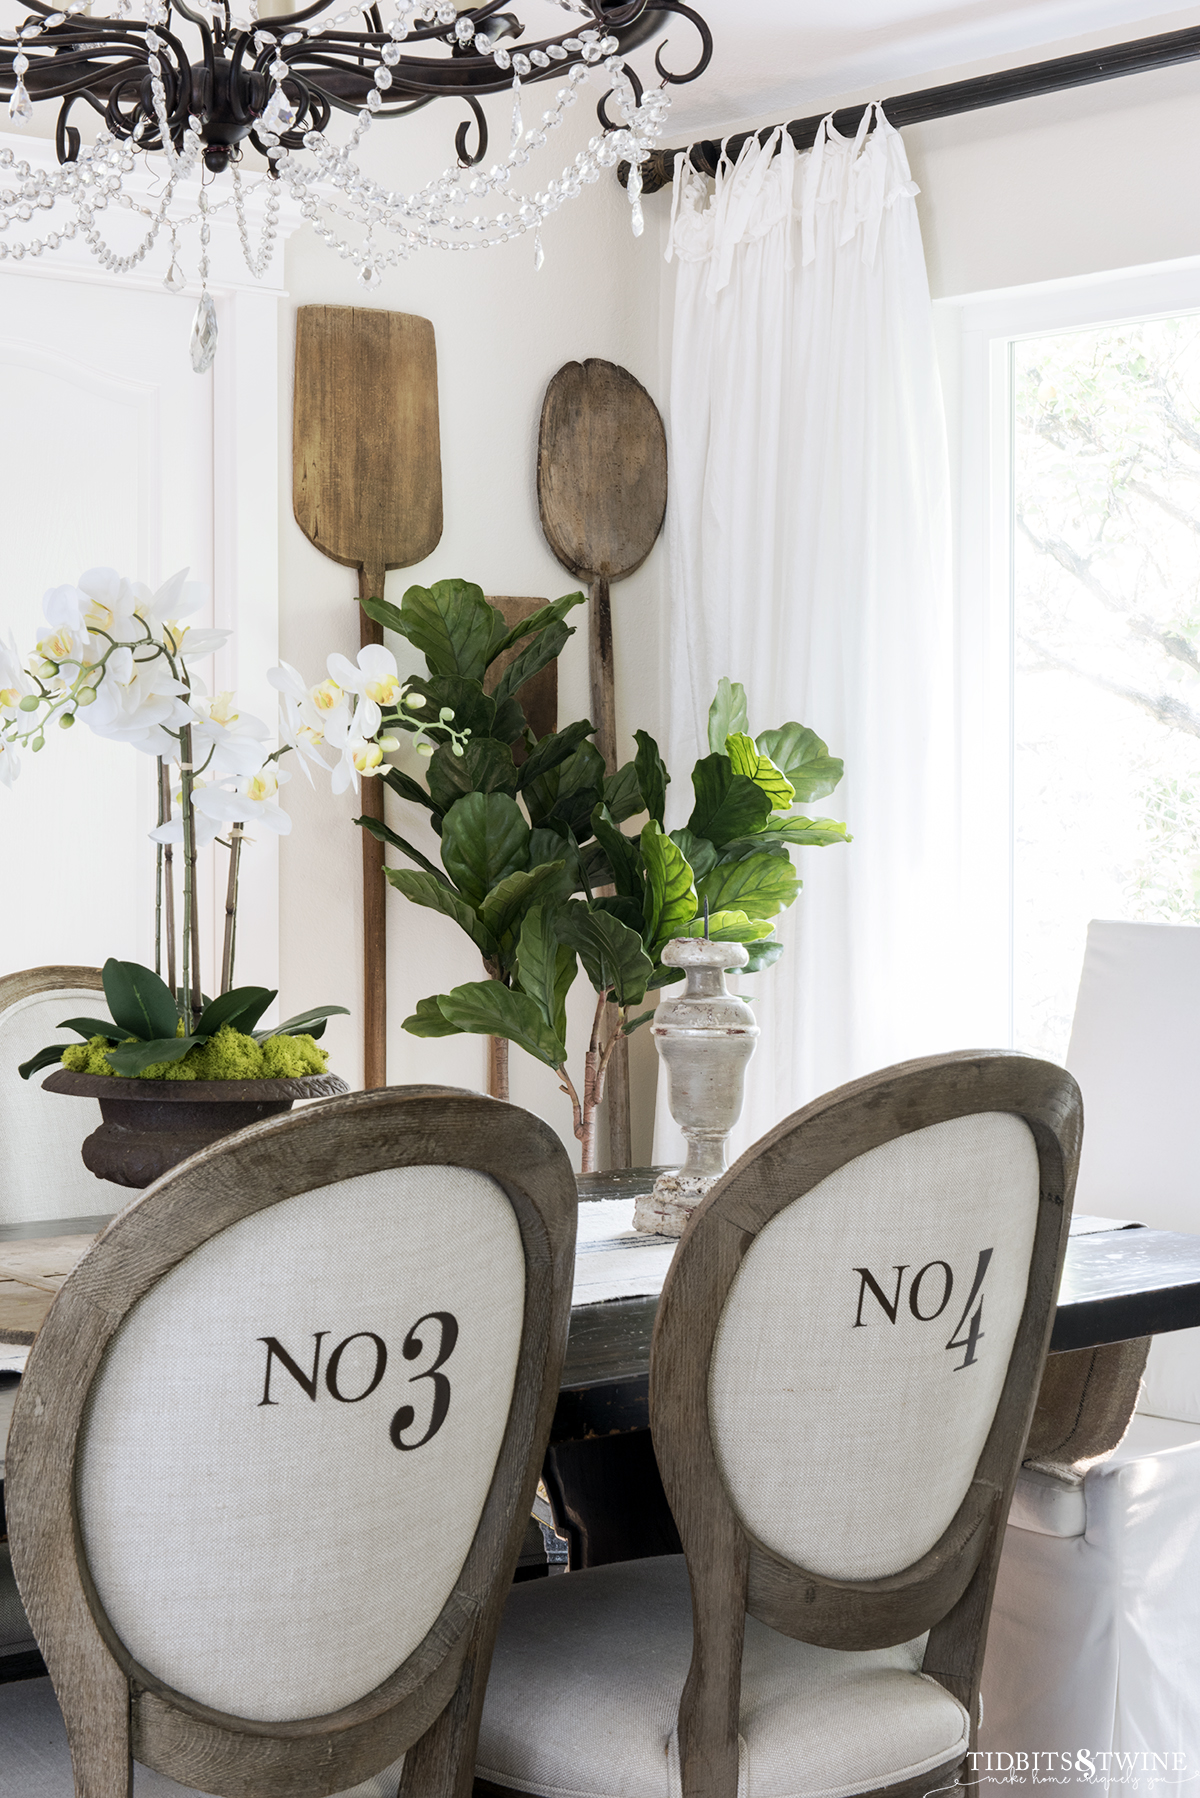 round french linen chairs with numbers on the back in dining room with white orchid on the table and vintage bread paddles hanging on the wall